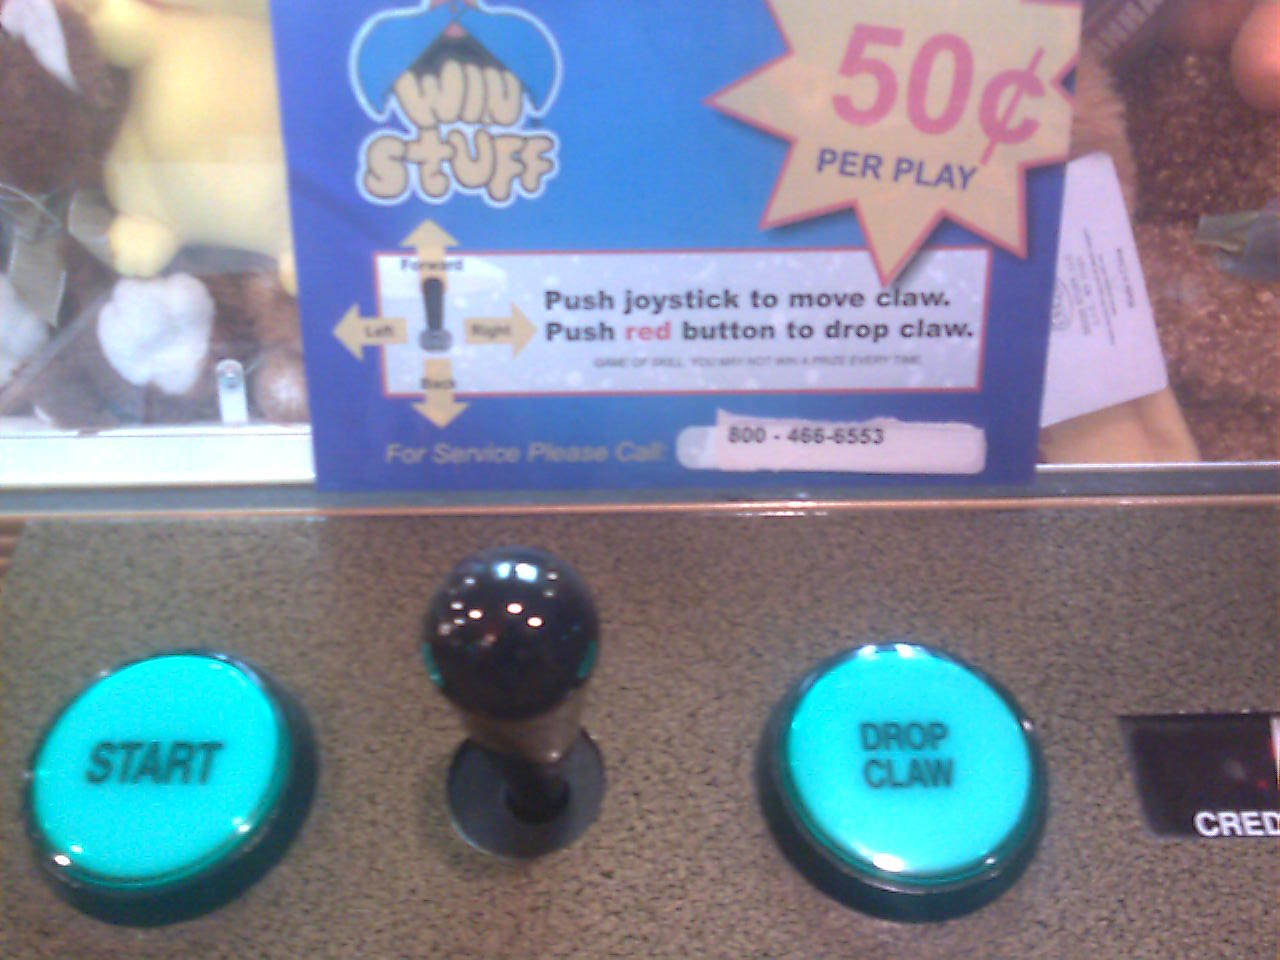 Seen on a claw machine in Denny's